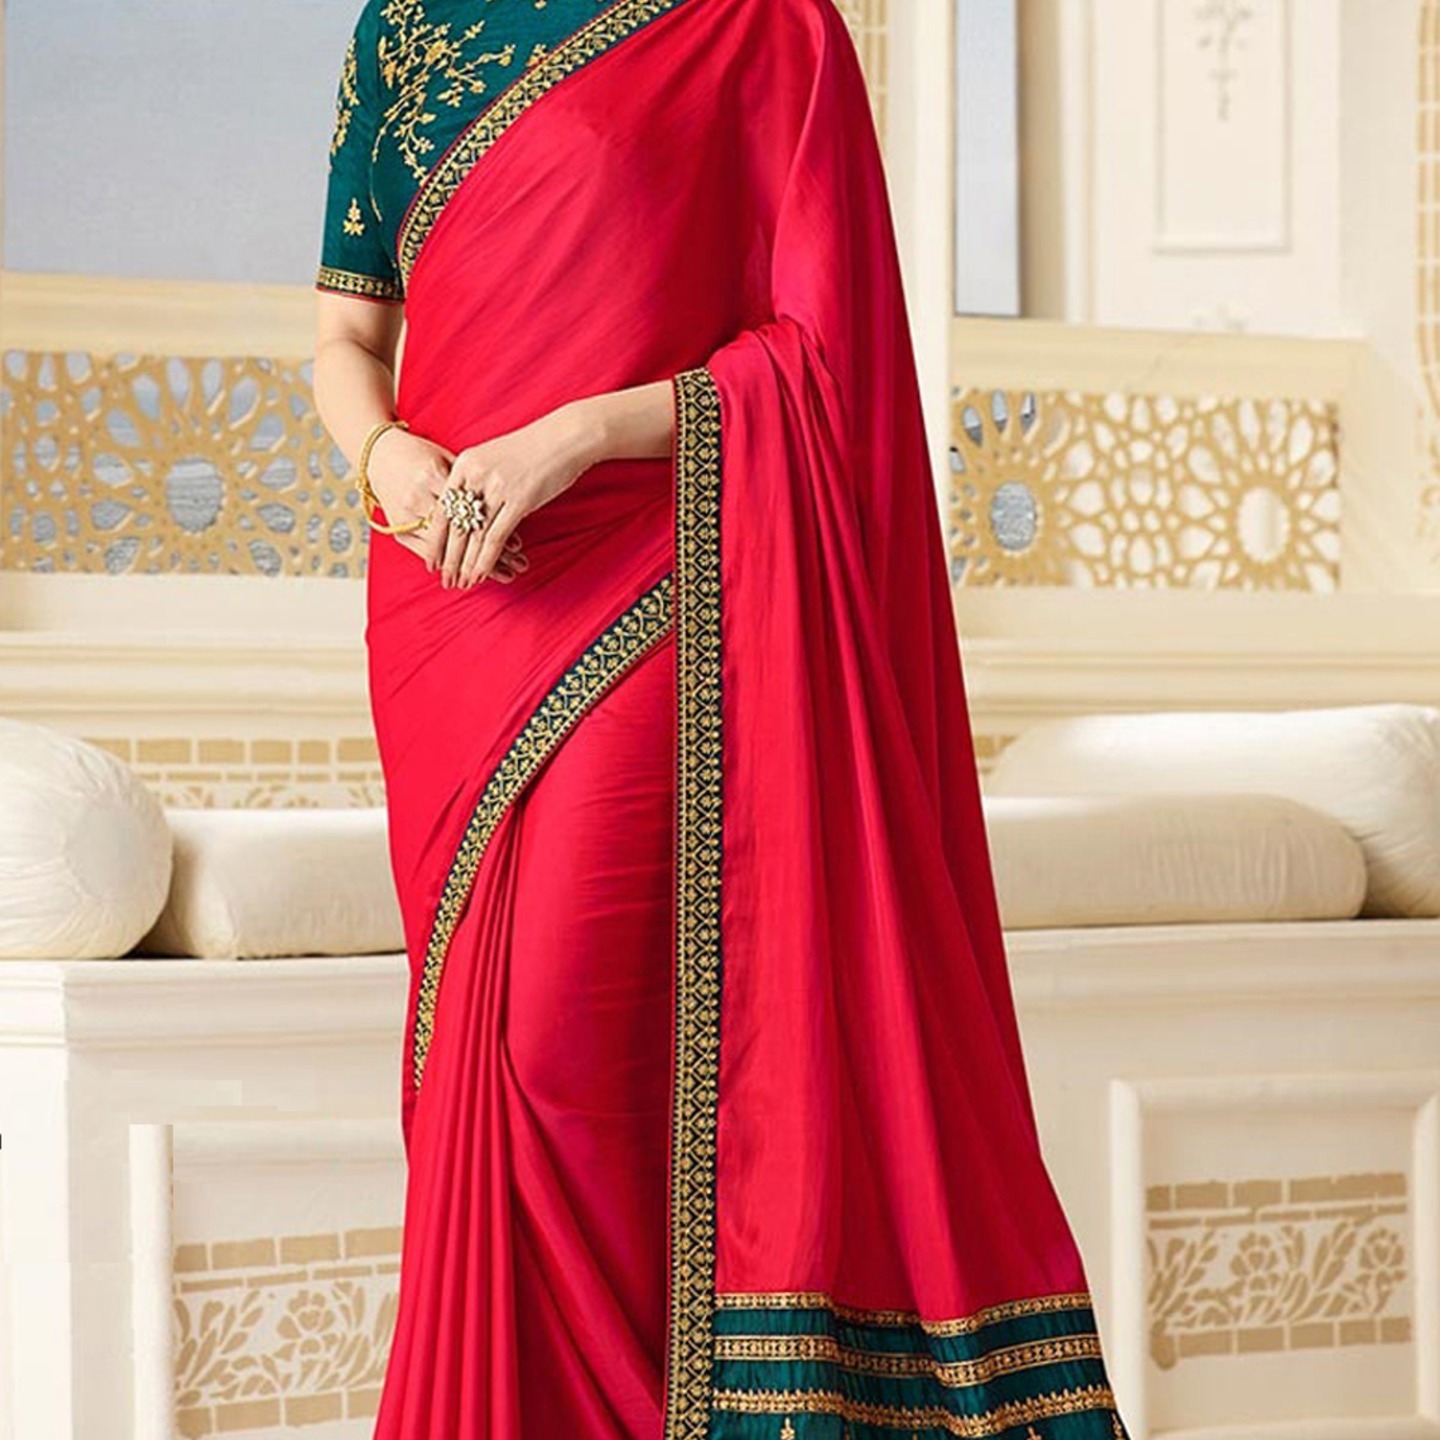 Robe Riche Pink Color Malai Silk Embroidery With Lace Saree 